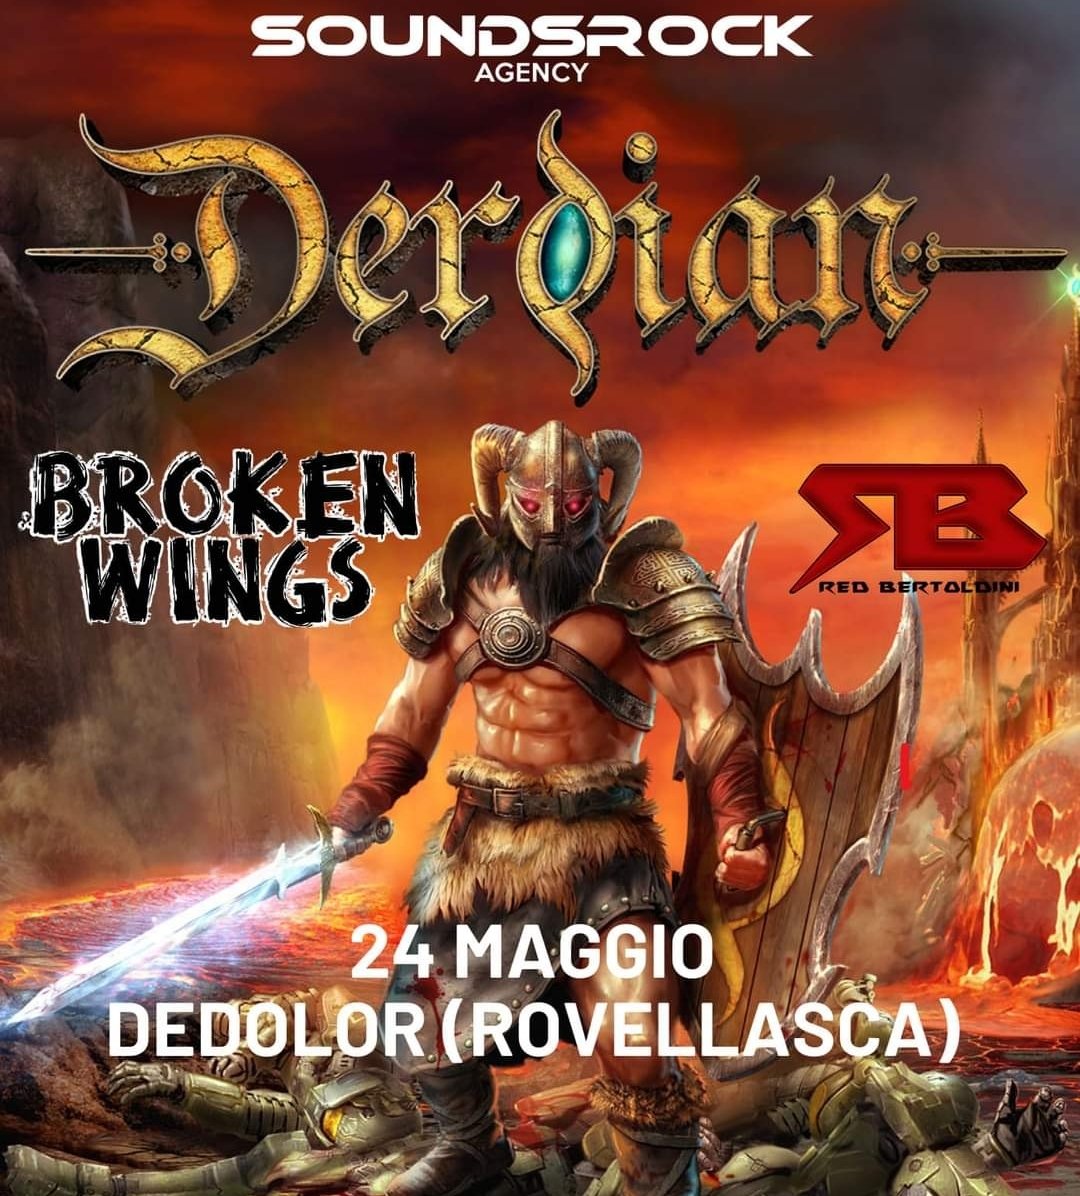 Save the date!
Link to the event:
⬇️⬇️⬇️
facebook.com/events/s/derdi…

#newshow #HeavyMetal #powermetal #concert2024